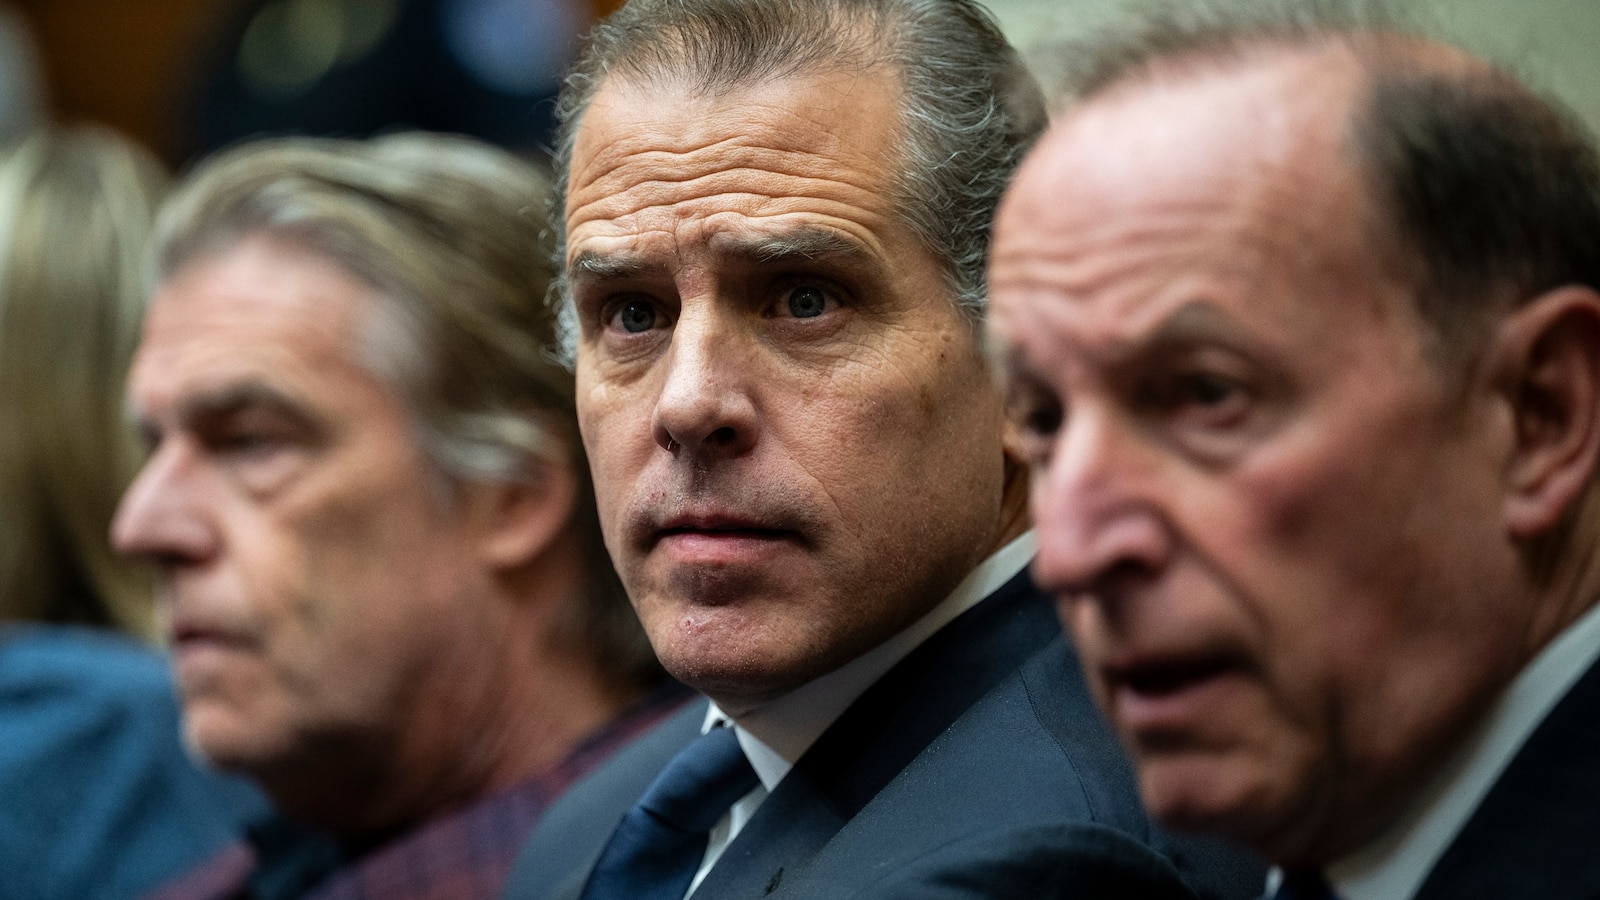 Judge denies all 8 of Hunter Biden's motions to dismiss his tax indictment